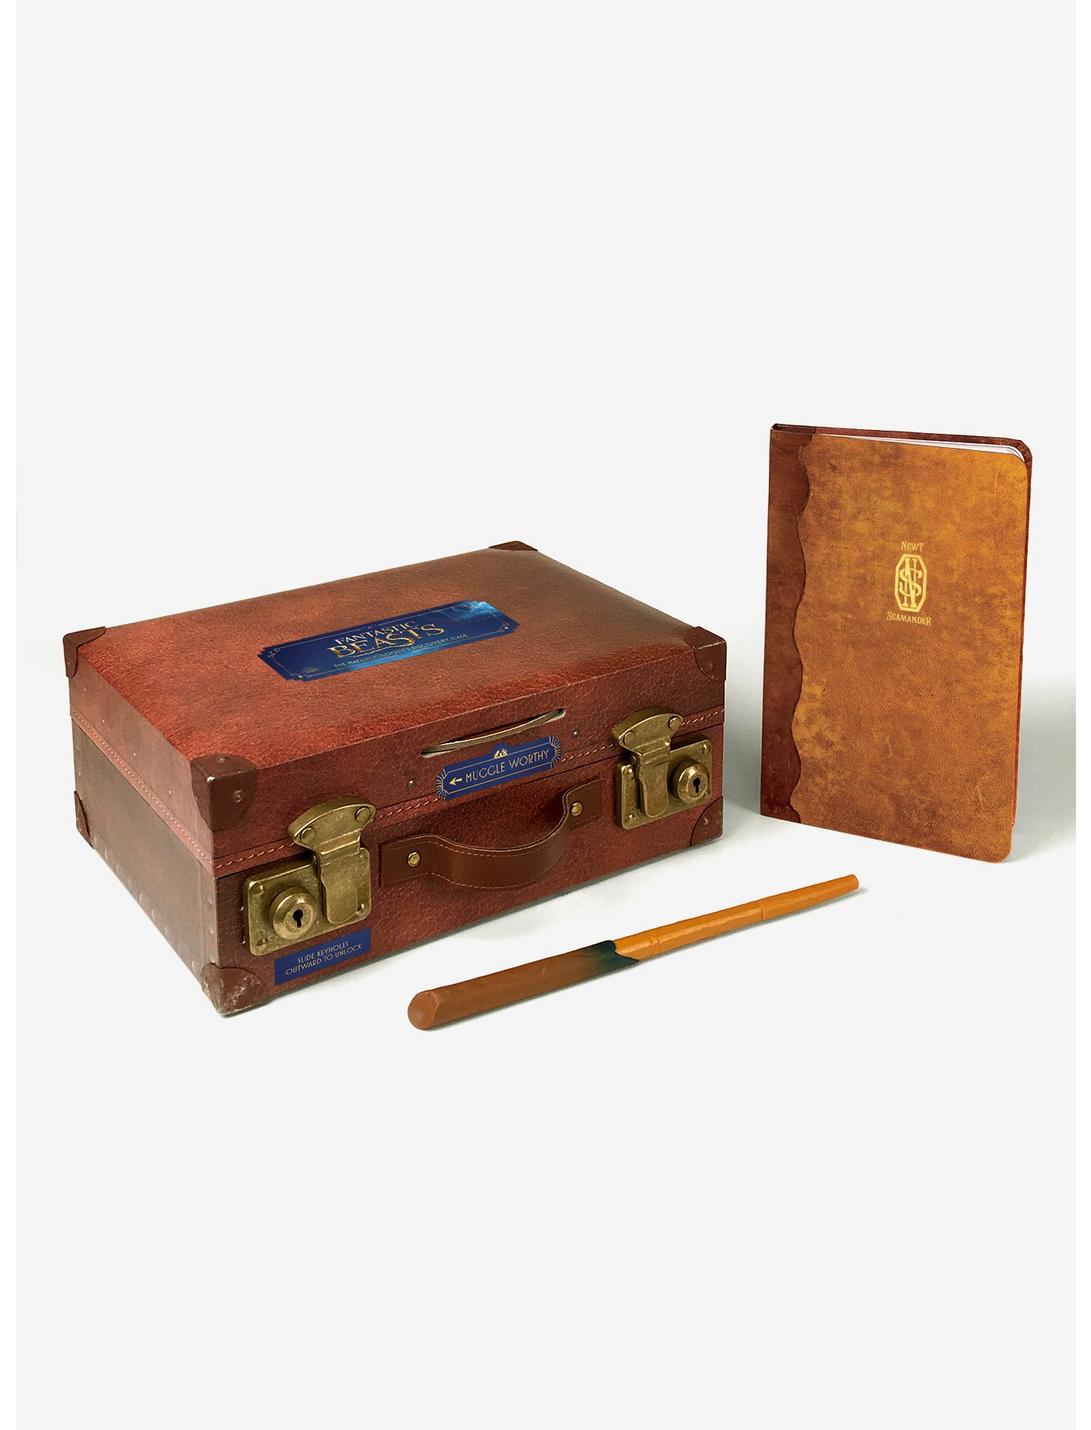 Fantastic Beasts And Where To Find Them Magizoologists Discovery Case, , hi-res